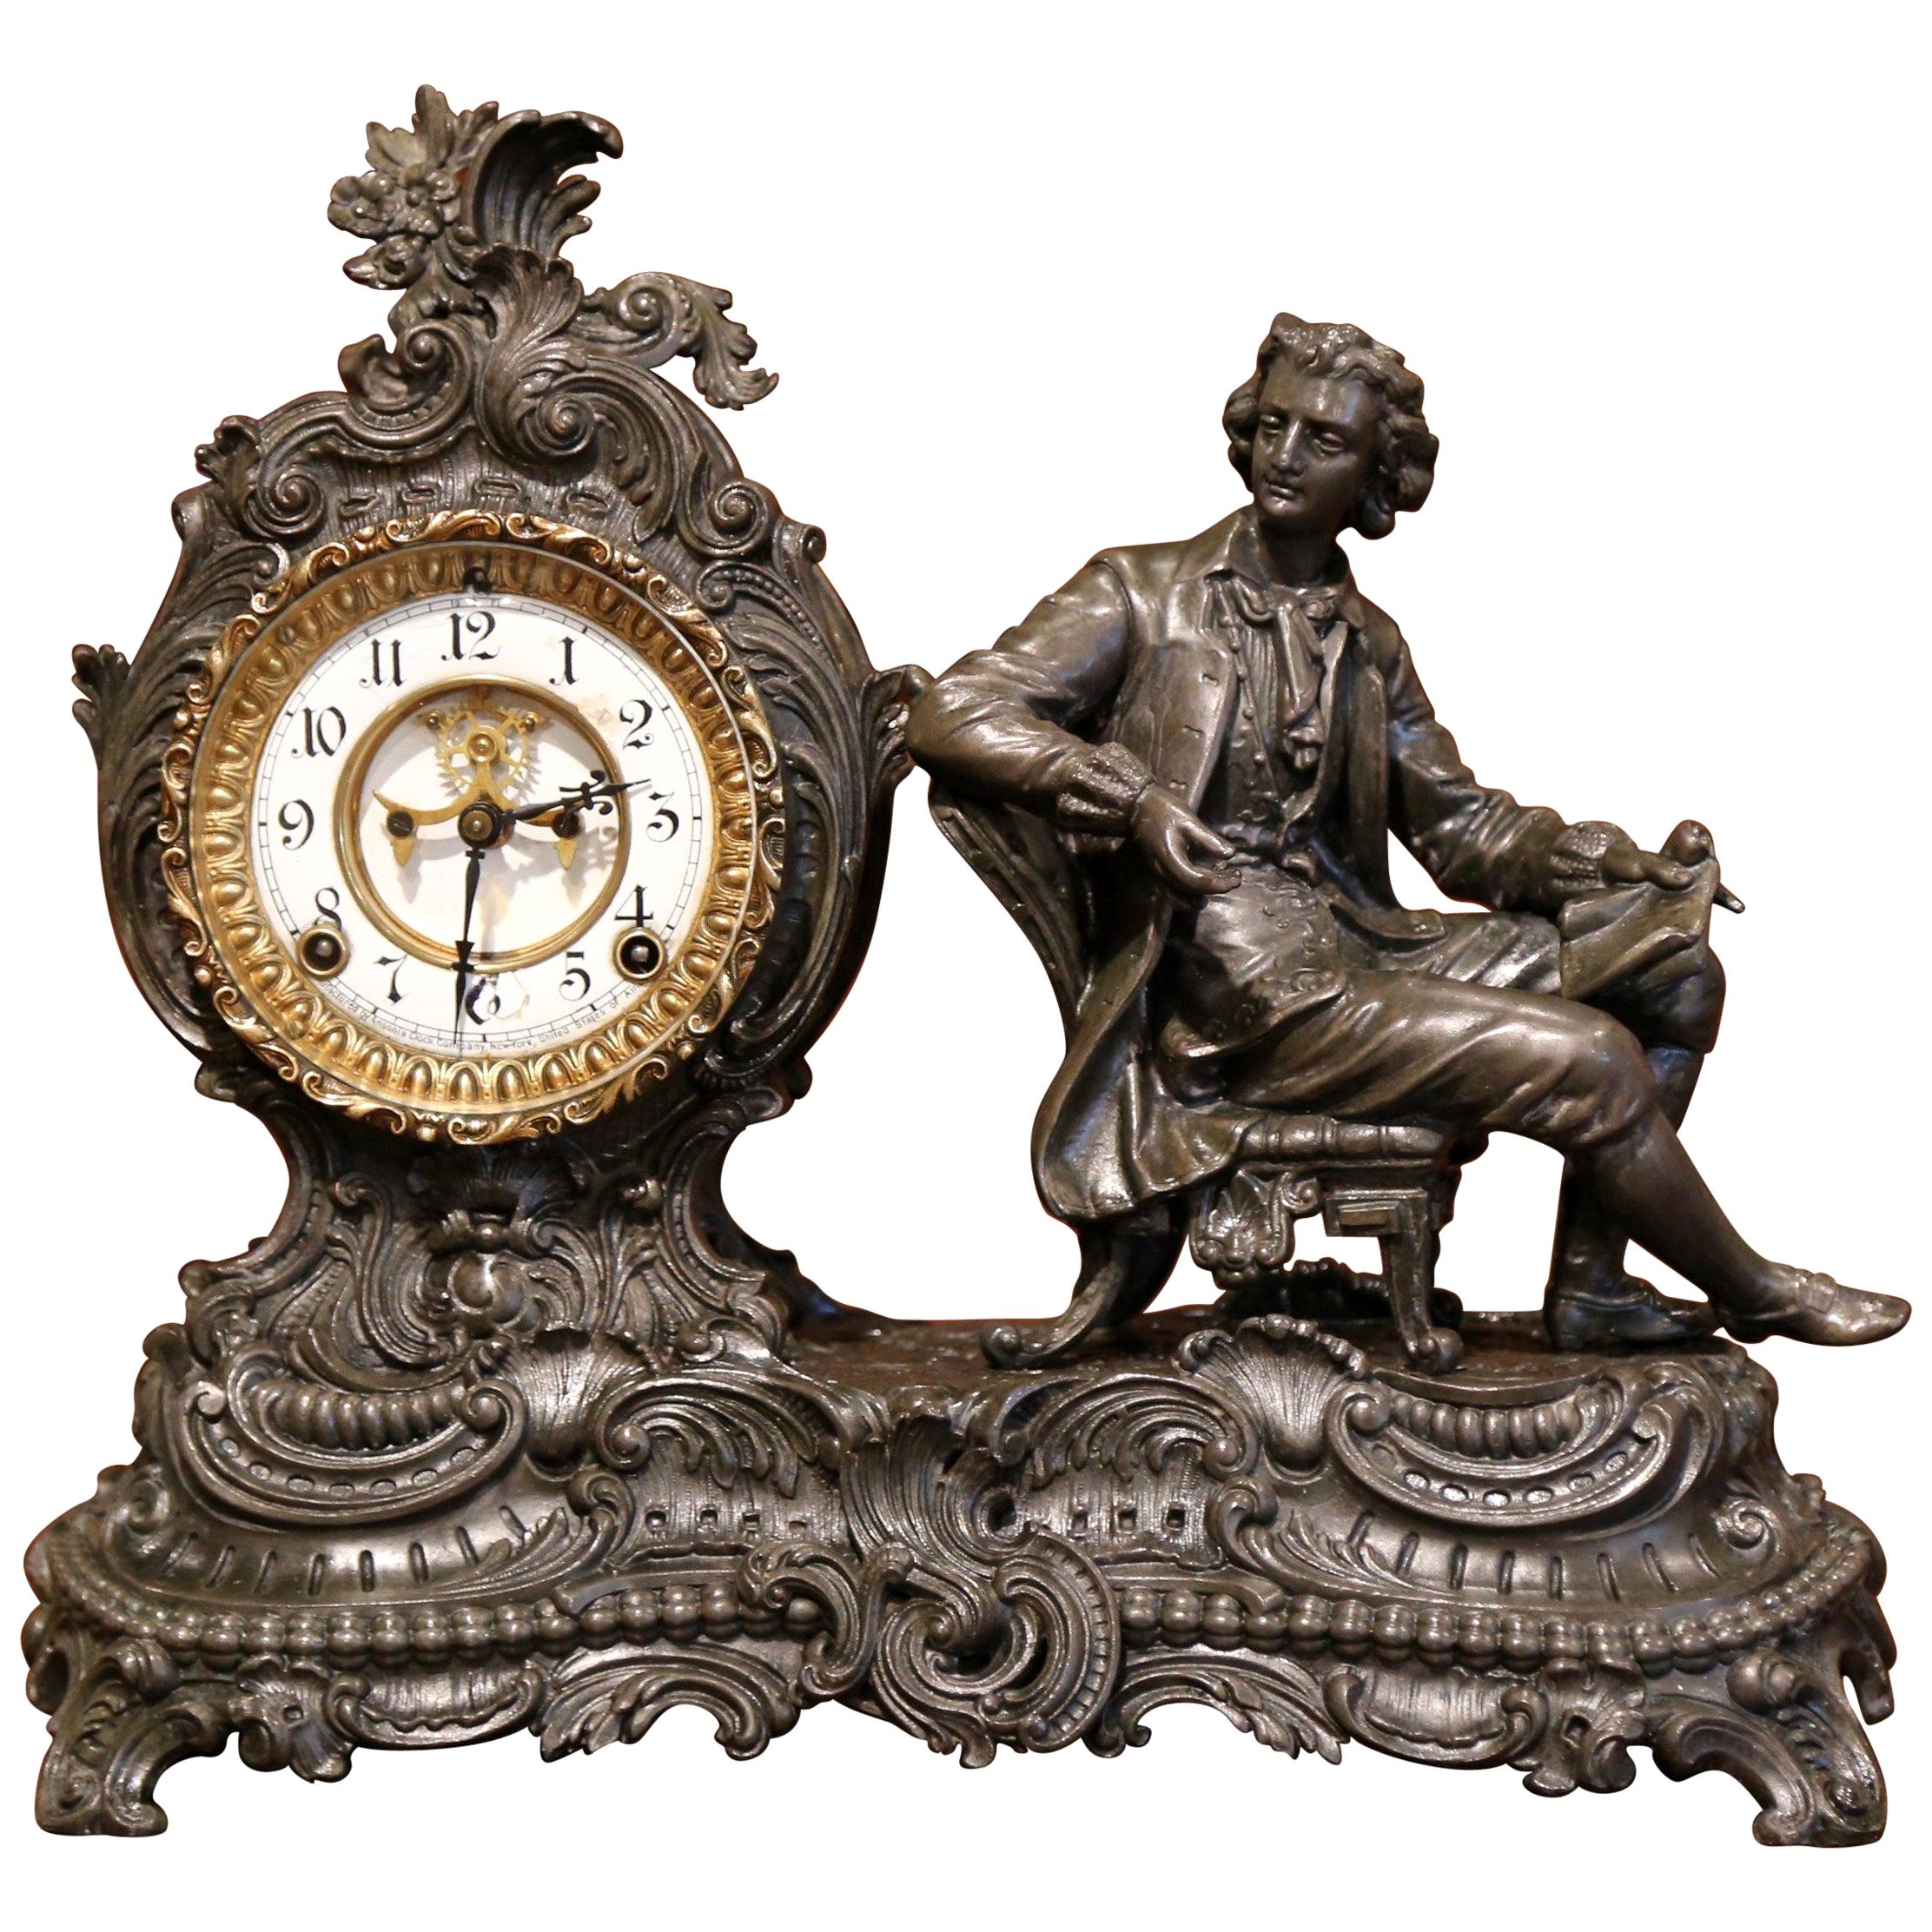 19th Century Patinated Spelter Mantel Clock Statue by Ansonia Clock Company